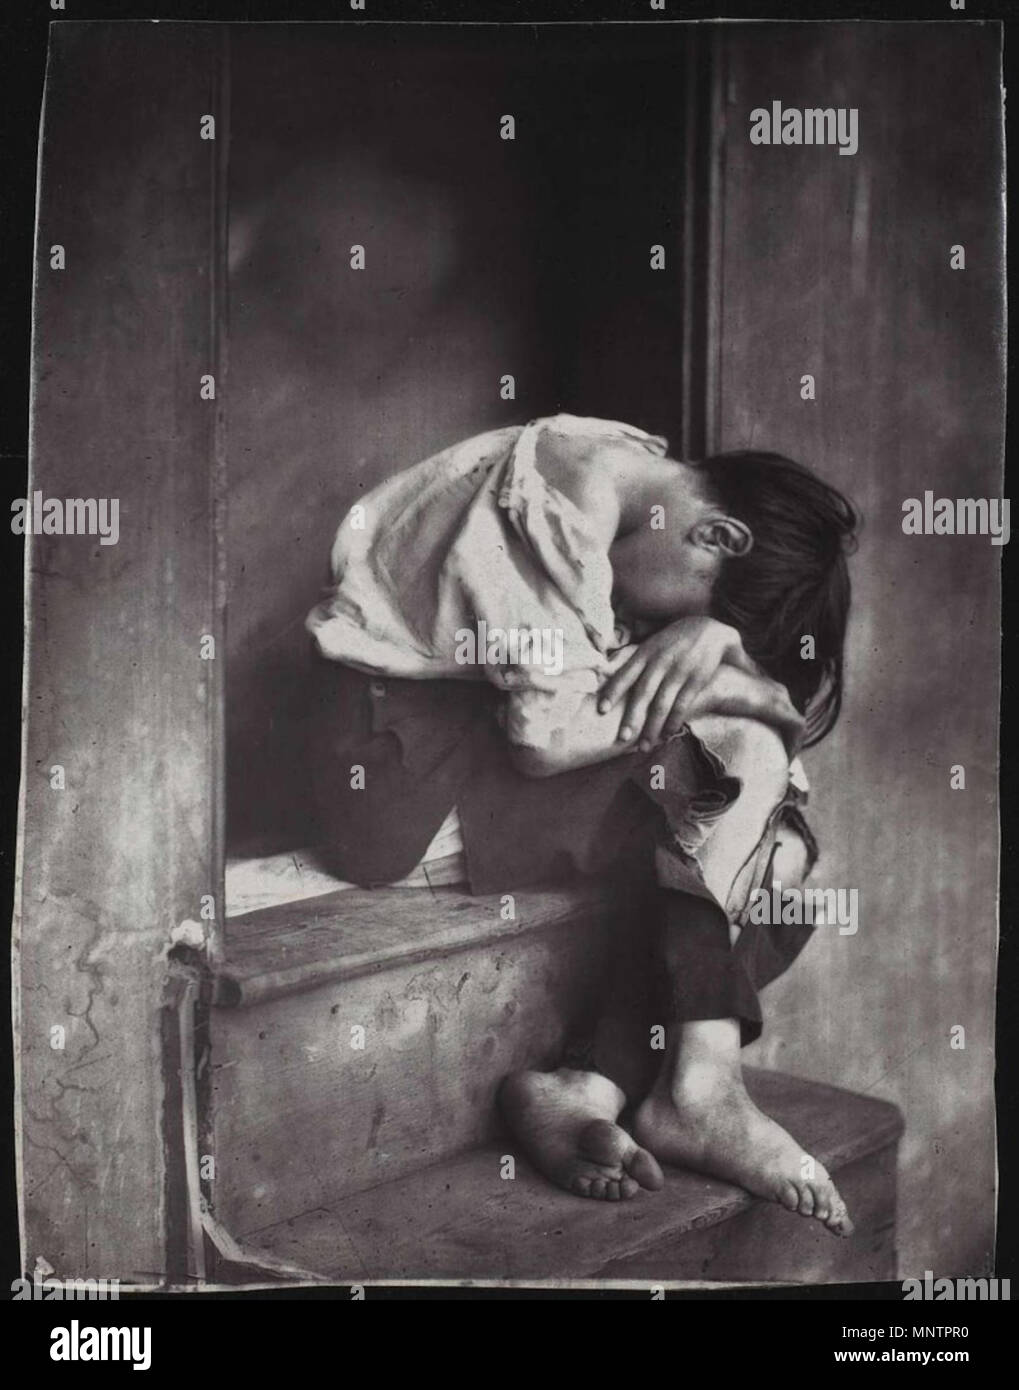 . English: Poor Jo by O. G. Rejlander. It's not a candid street photo, but a posed, staged, heavily retouched studio work. 1864.   Oscar Gustave Rejlander  (1813–1875)     Alternative names O. G. Rejlander; Oscar Gustav Rejlander; Oscar Gustave Reijlander  Description British-Swedish photographer and painter  Date of birth/death 1813 18 January 1875  Location of birth/death Sweden Clapham  Work location London  Authority control  : Q725390 VIAF: 40230459 ISNI: 0000 0000 8375 2662 ULAN: 500030901 LCCN: n79023303 GND: 121262340 WorldCat 1048 Rejlander, 1864, Poor Jo Stock Photo